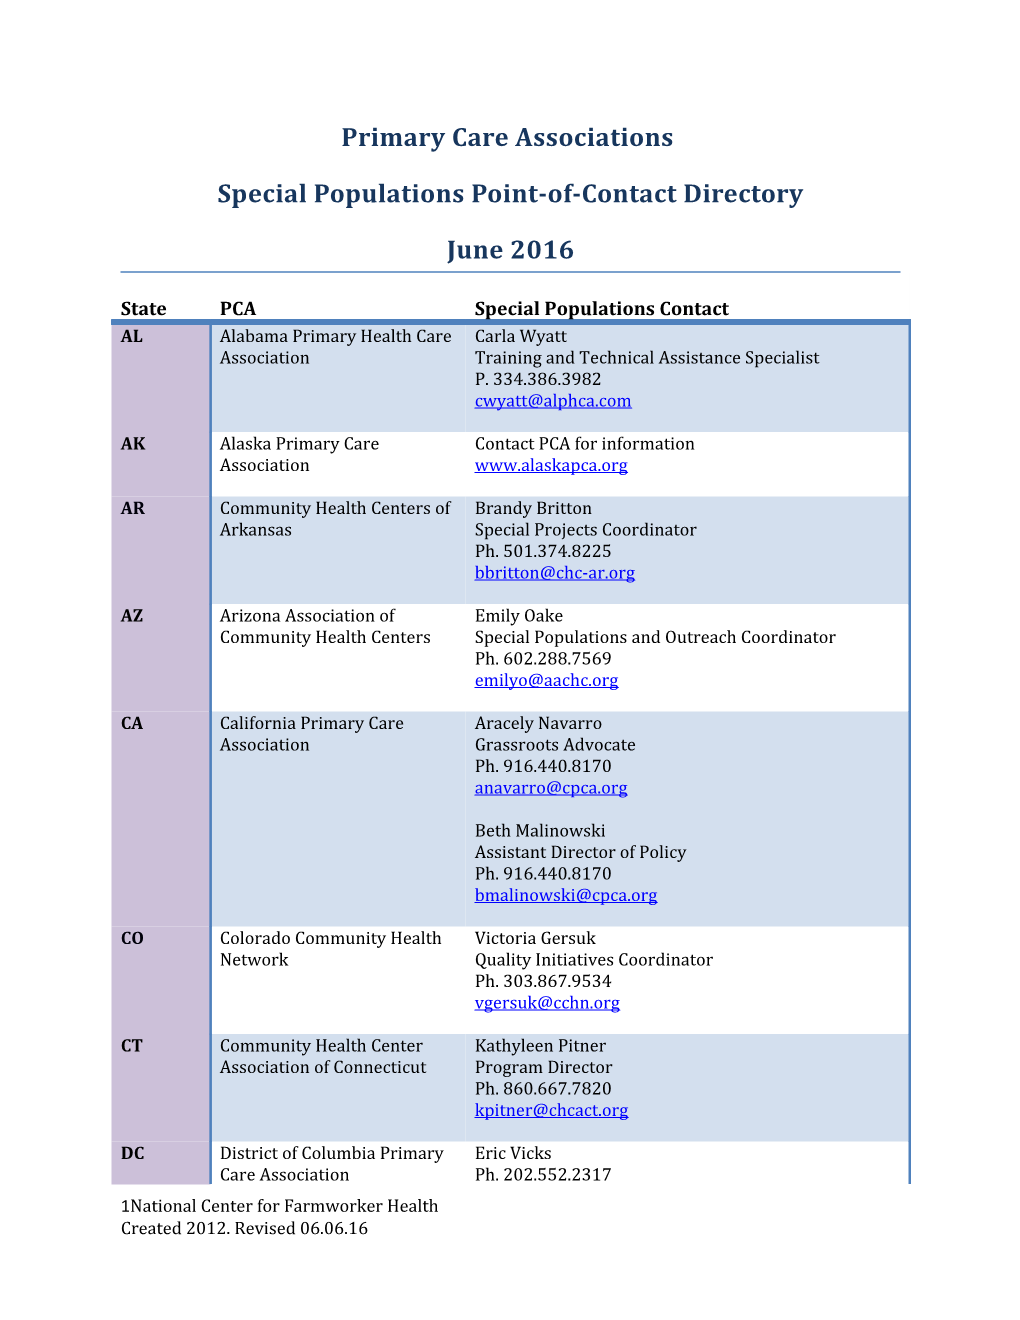 Special Populations Point-Of-Contact Directory